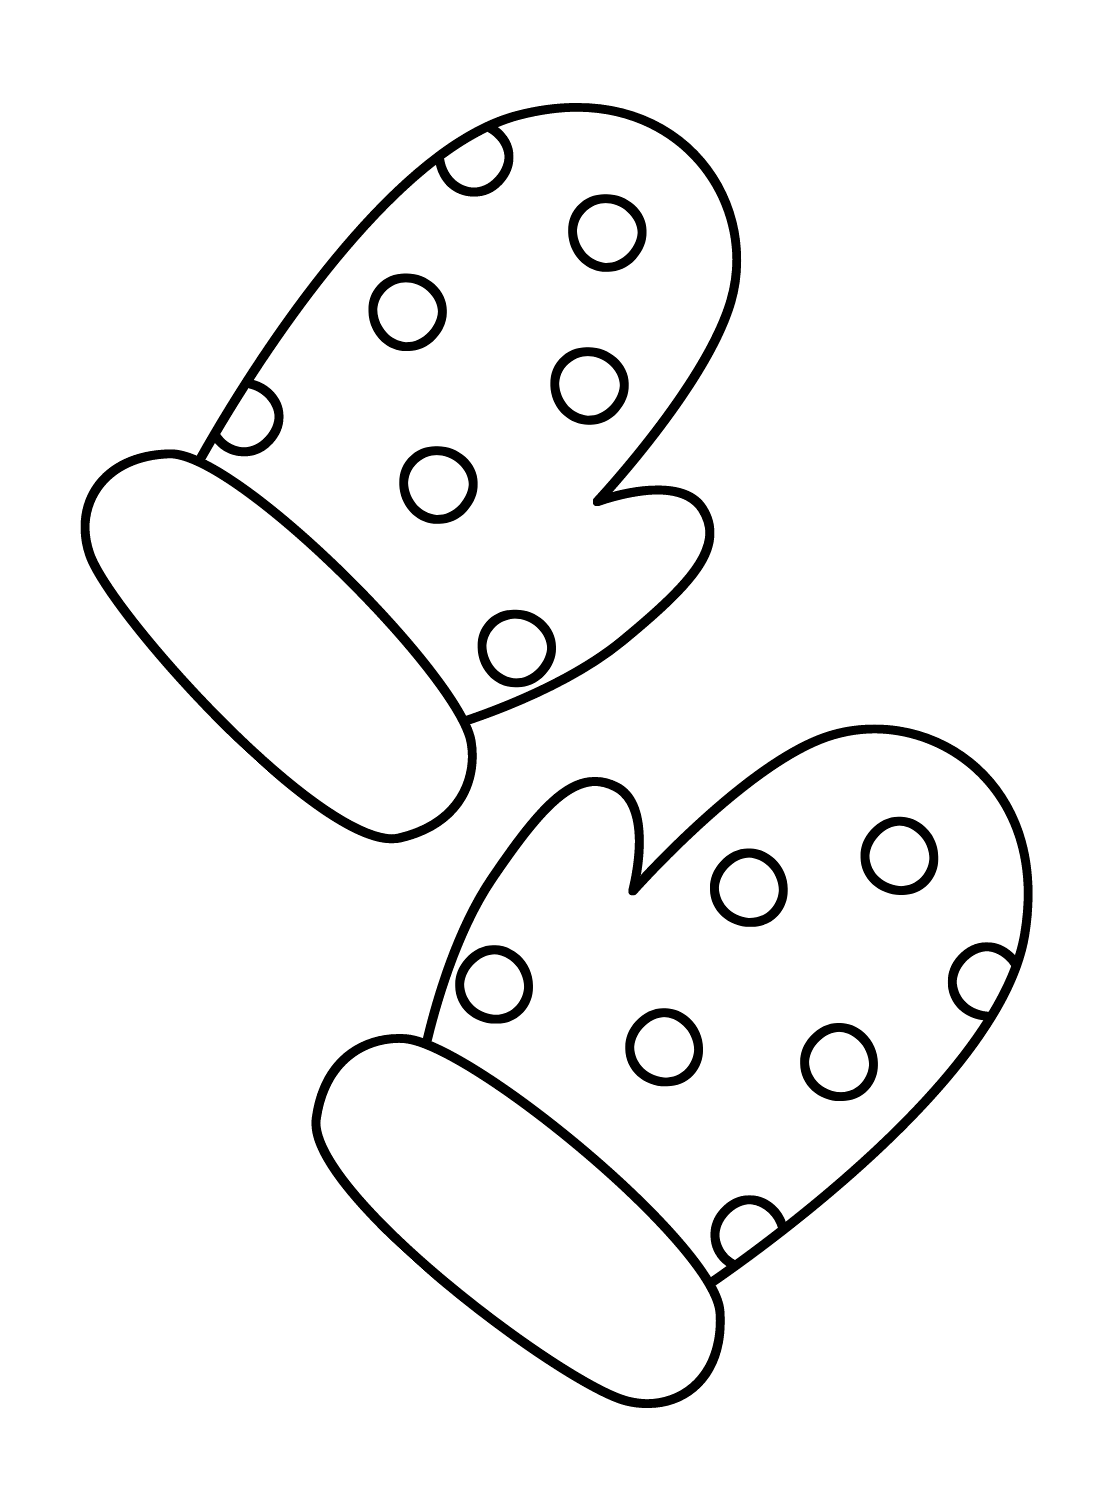 Mittens Free Coloring Page